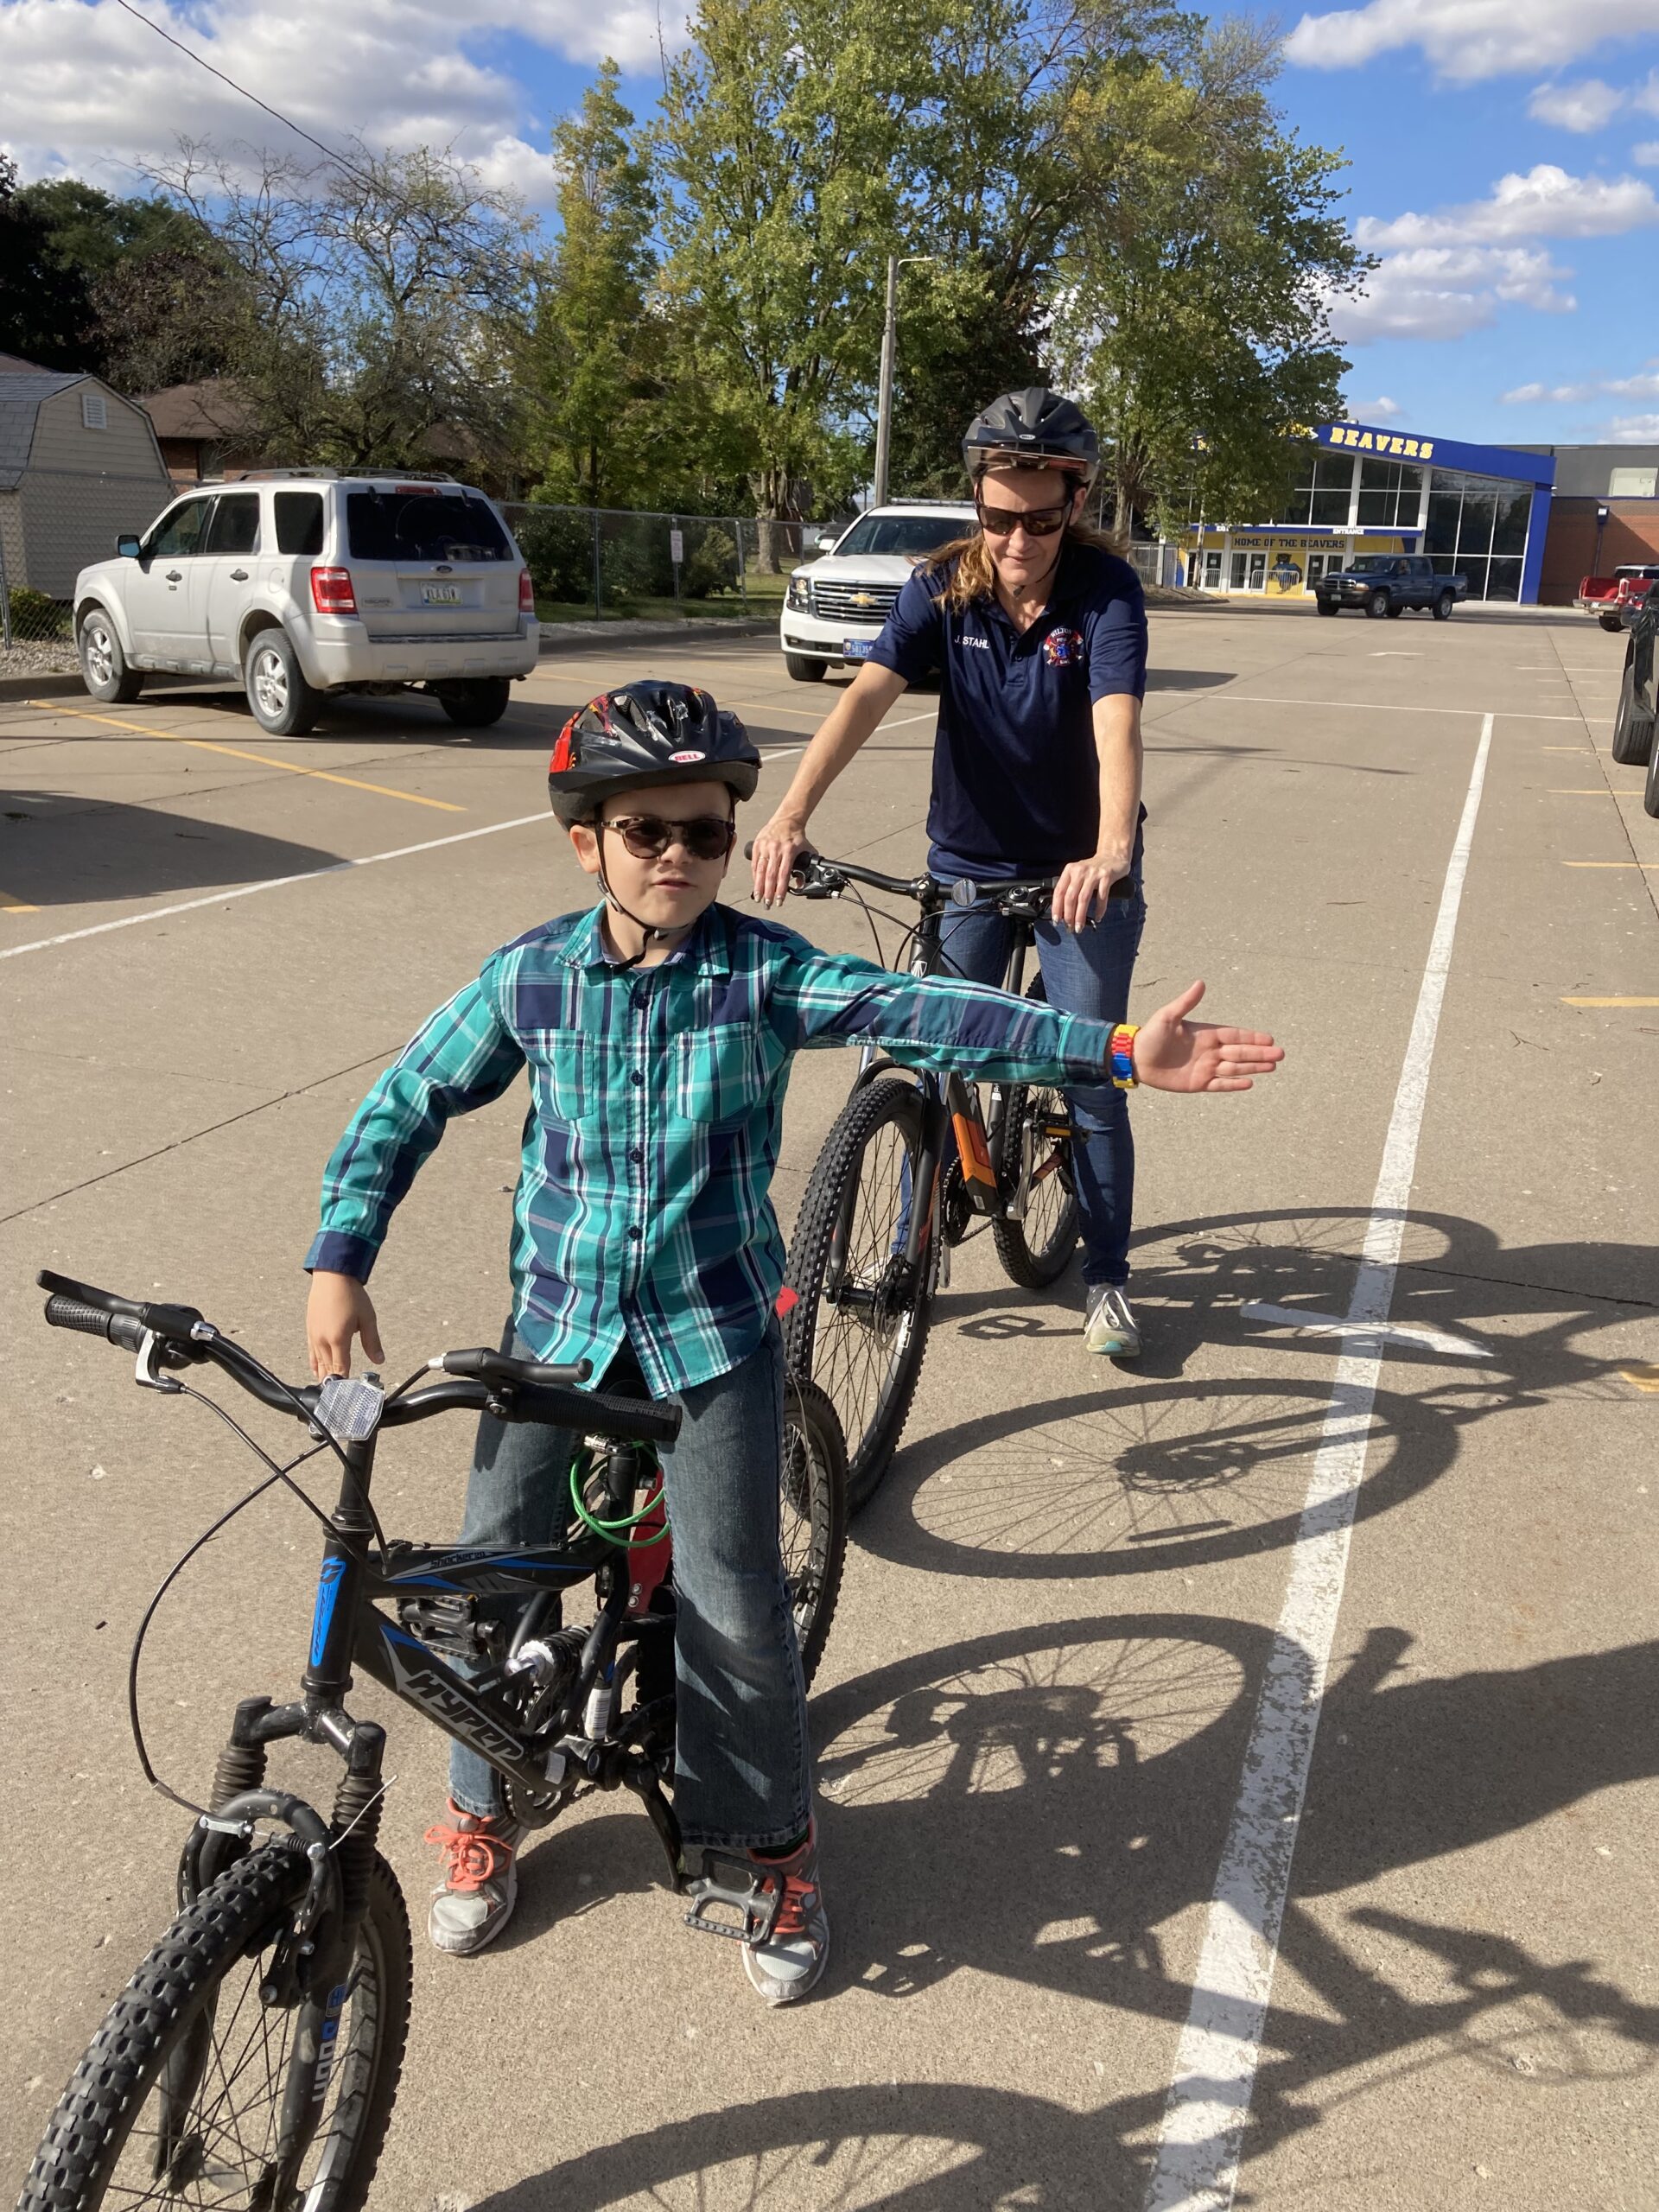 Get involved in Iowa Safe Routes to School in 2022